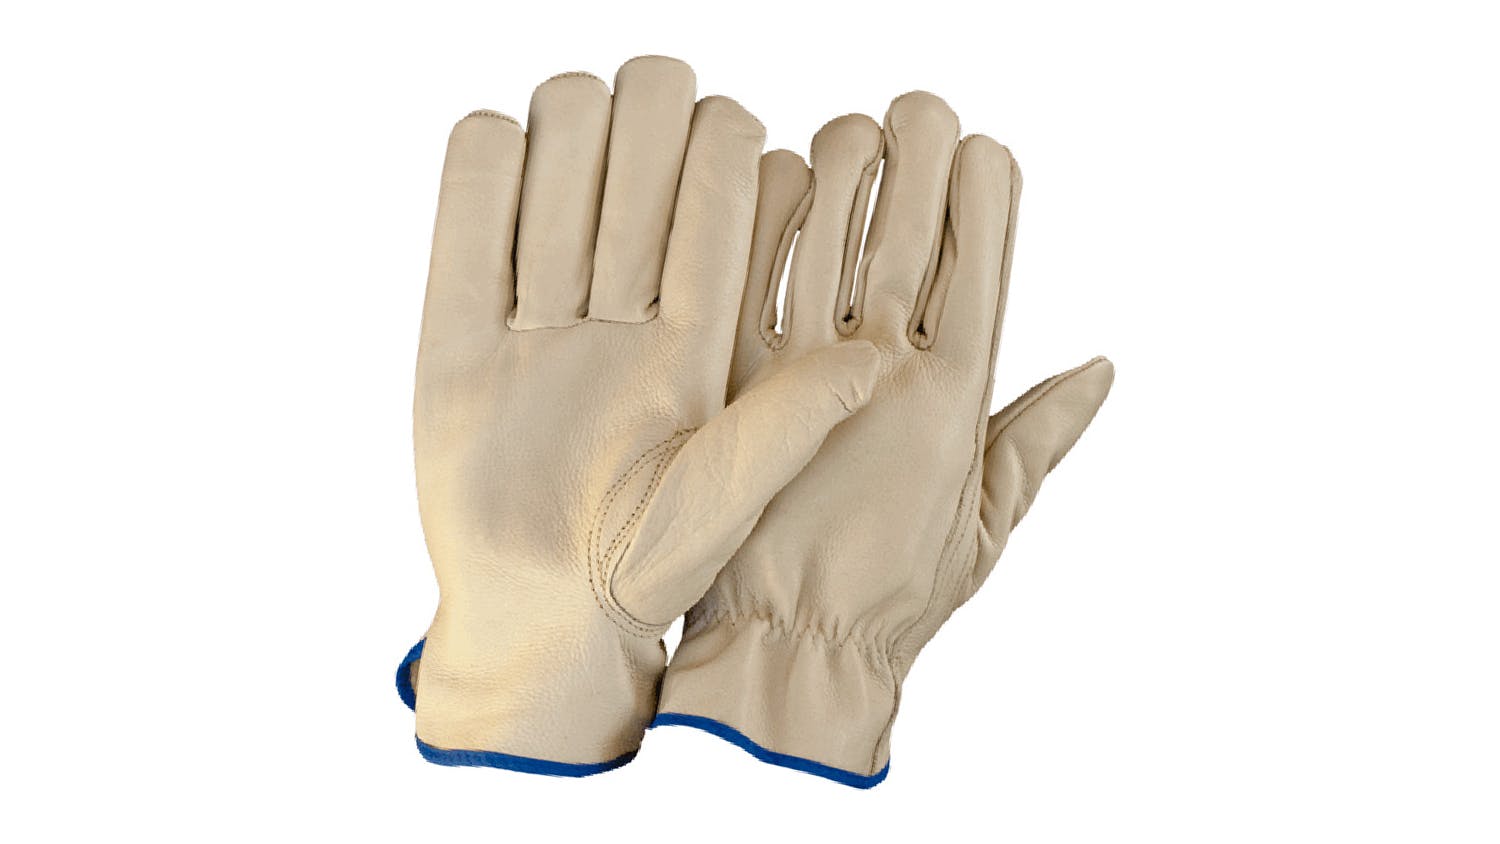 Western Riggers Omni Gloves - Large